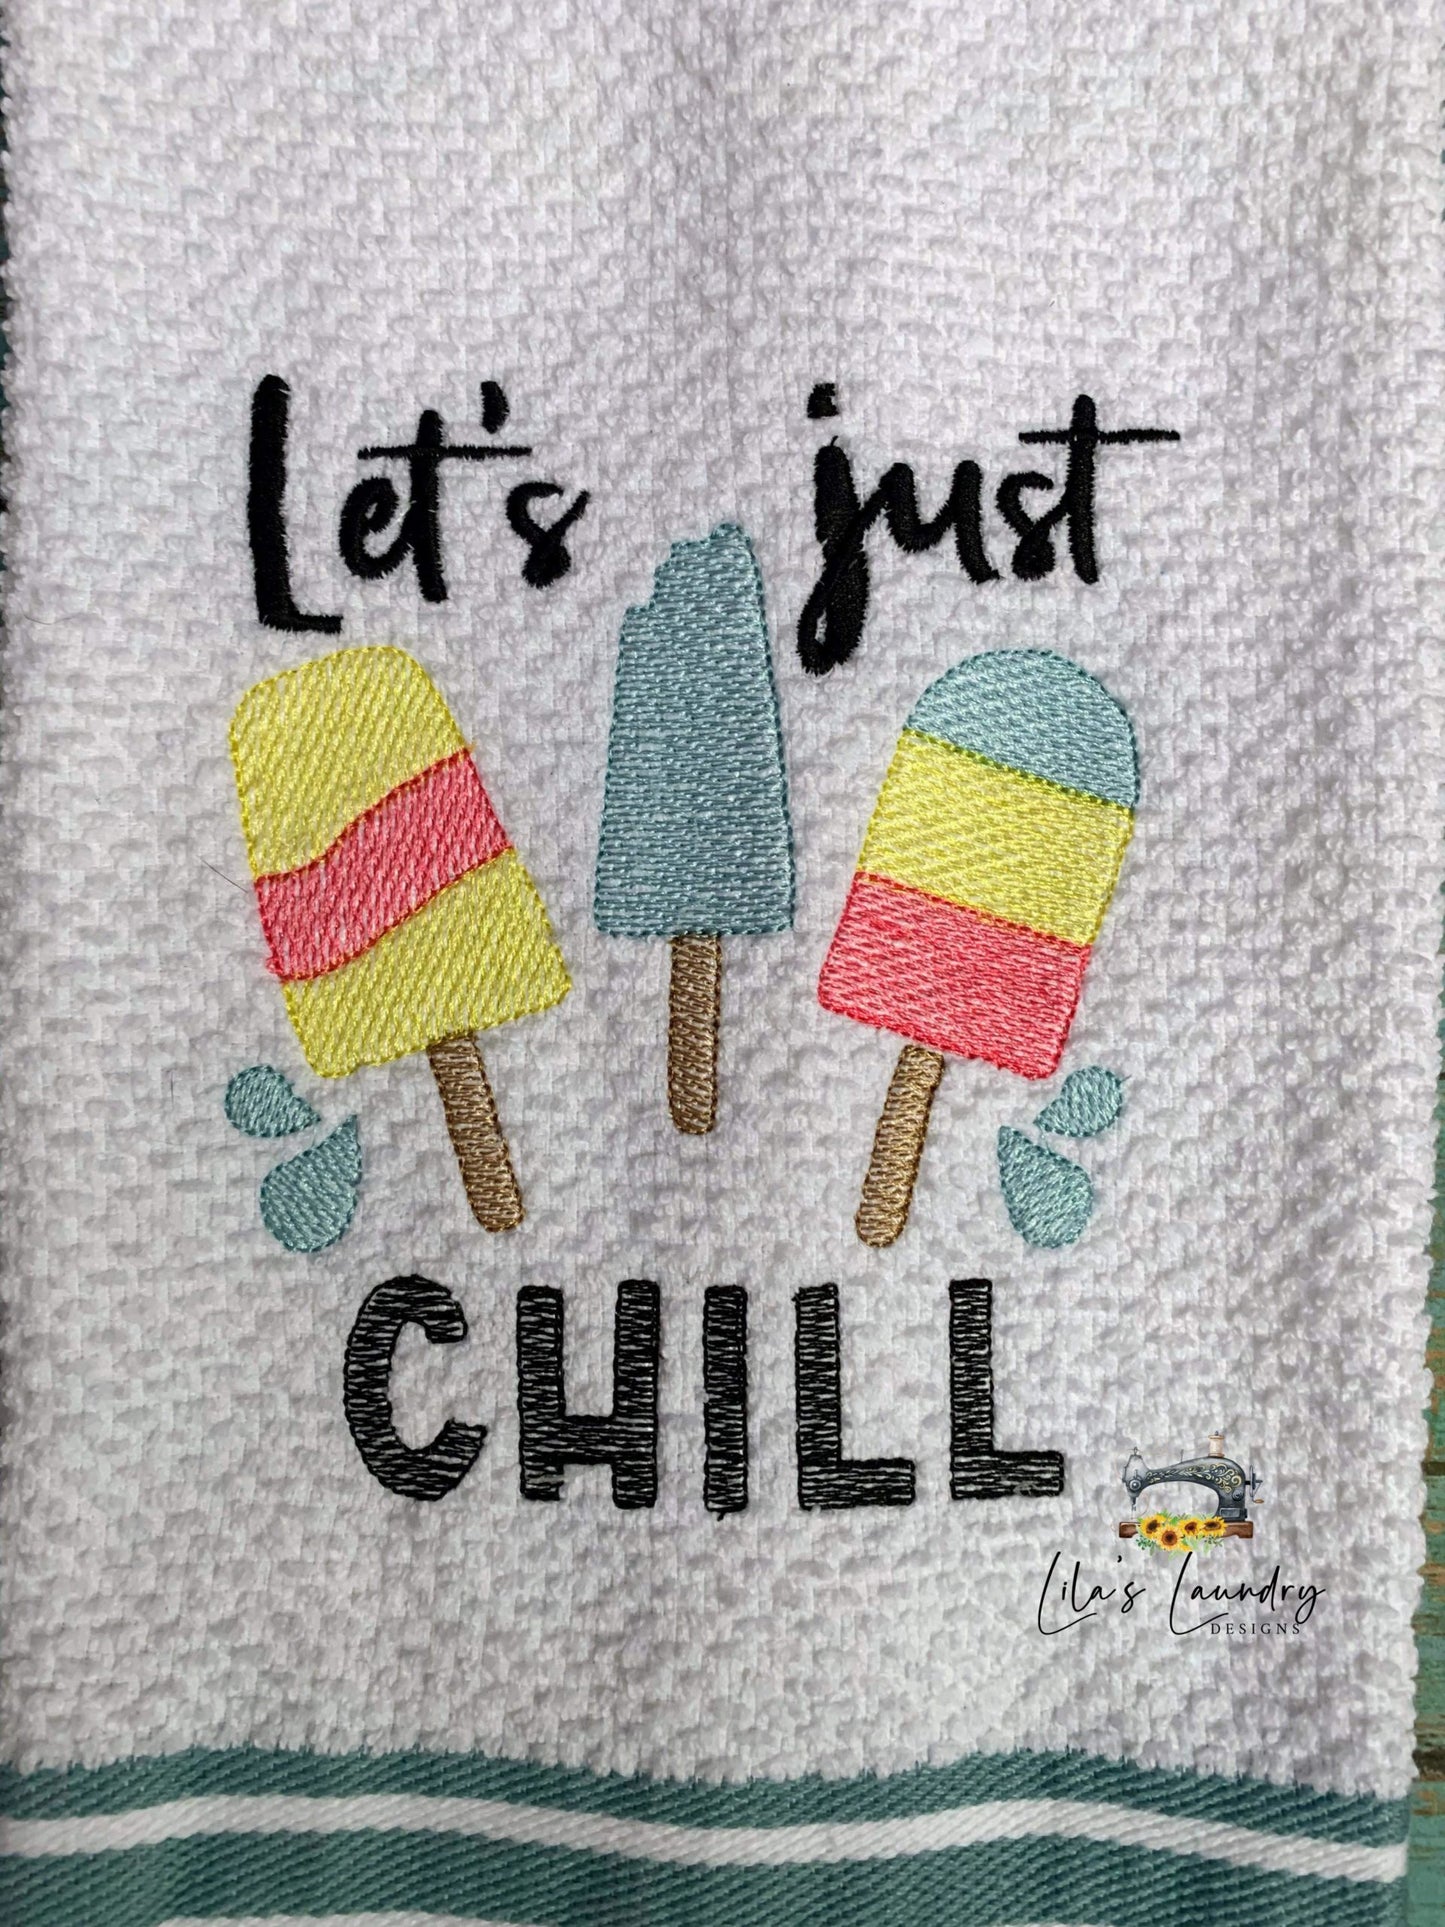 Let's Just Chill - 3 sizes- Digital Embroidery Design